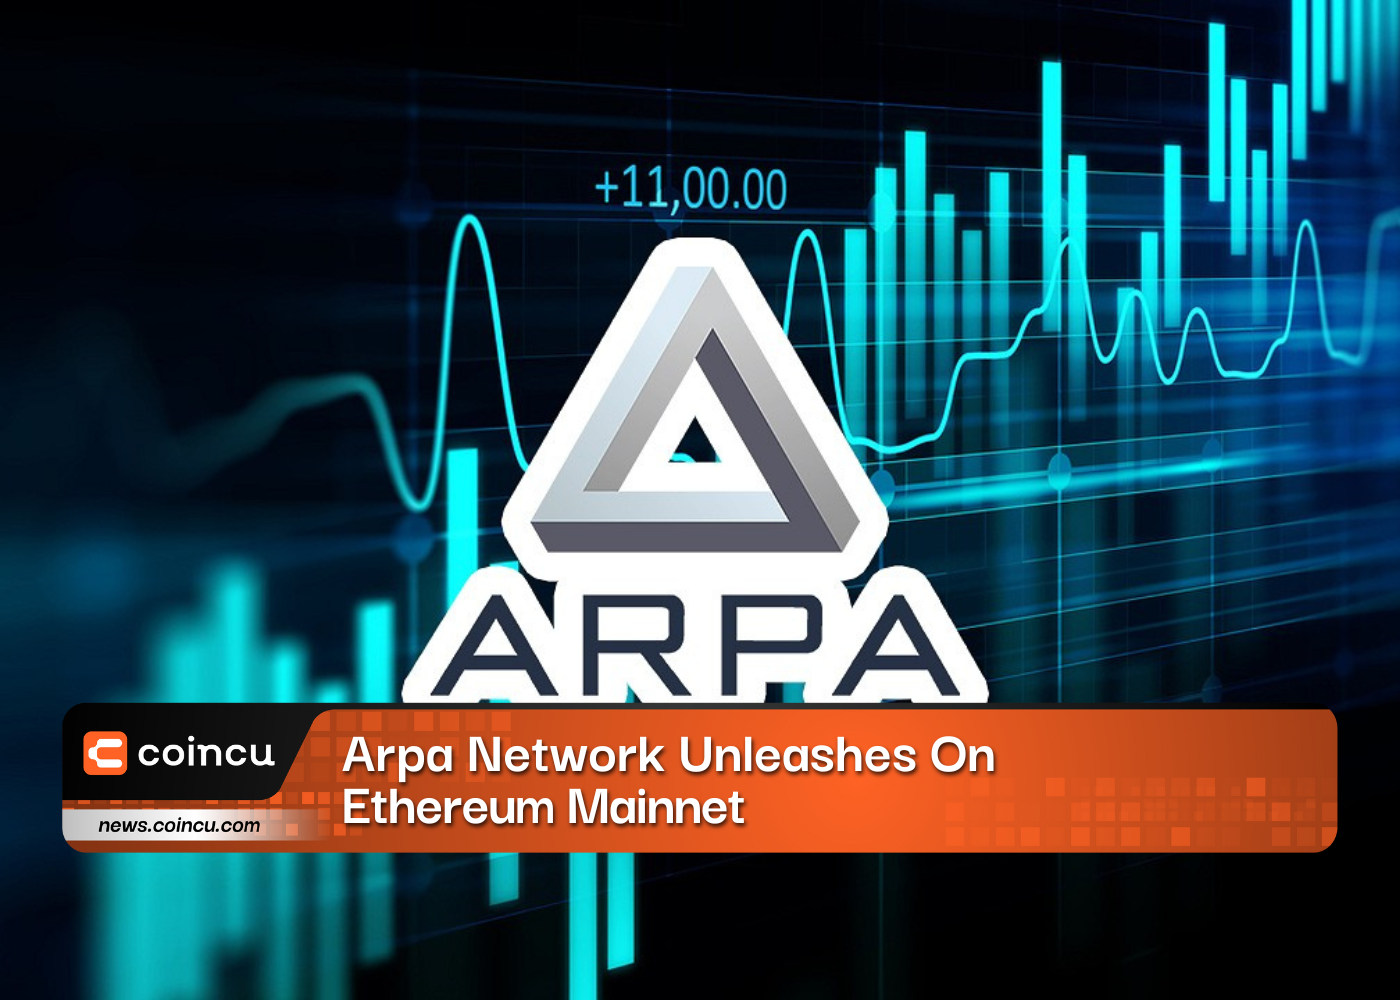 Arpa Network Unleashes On Ethereum Mainnet